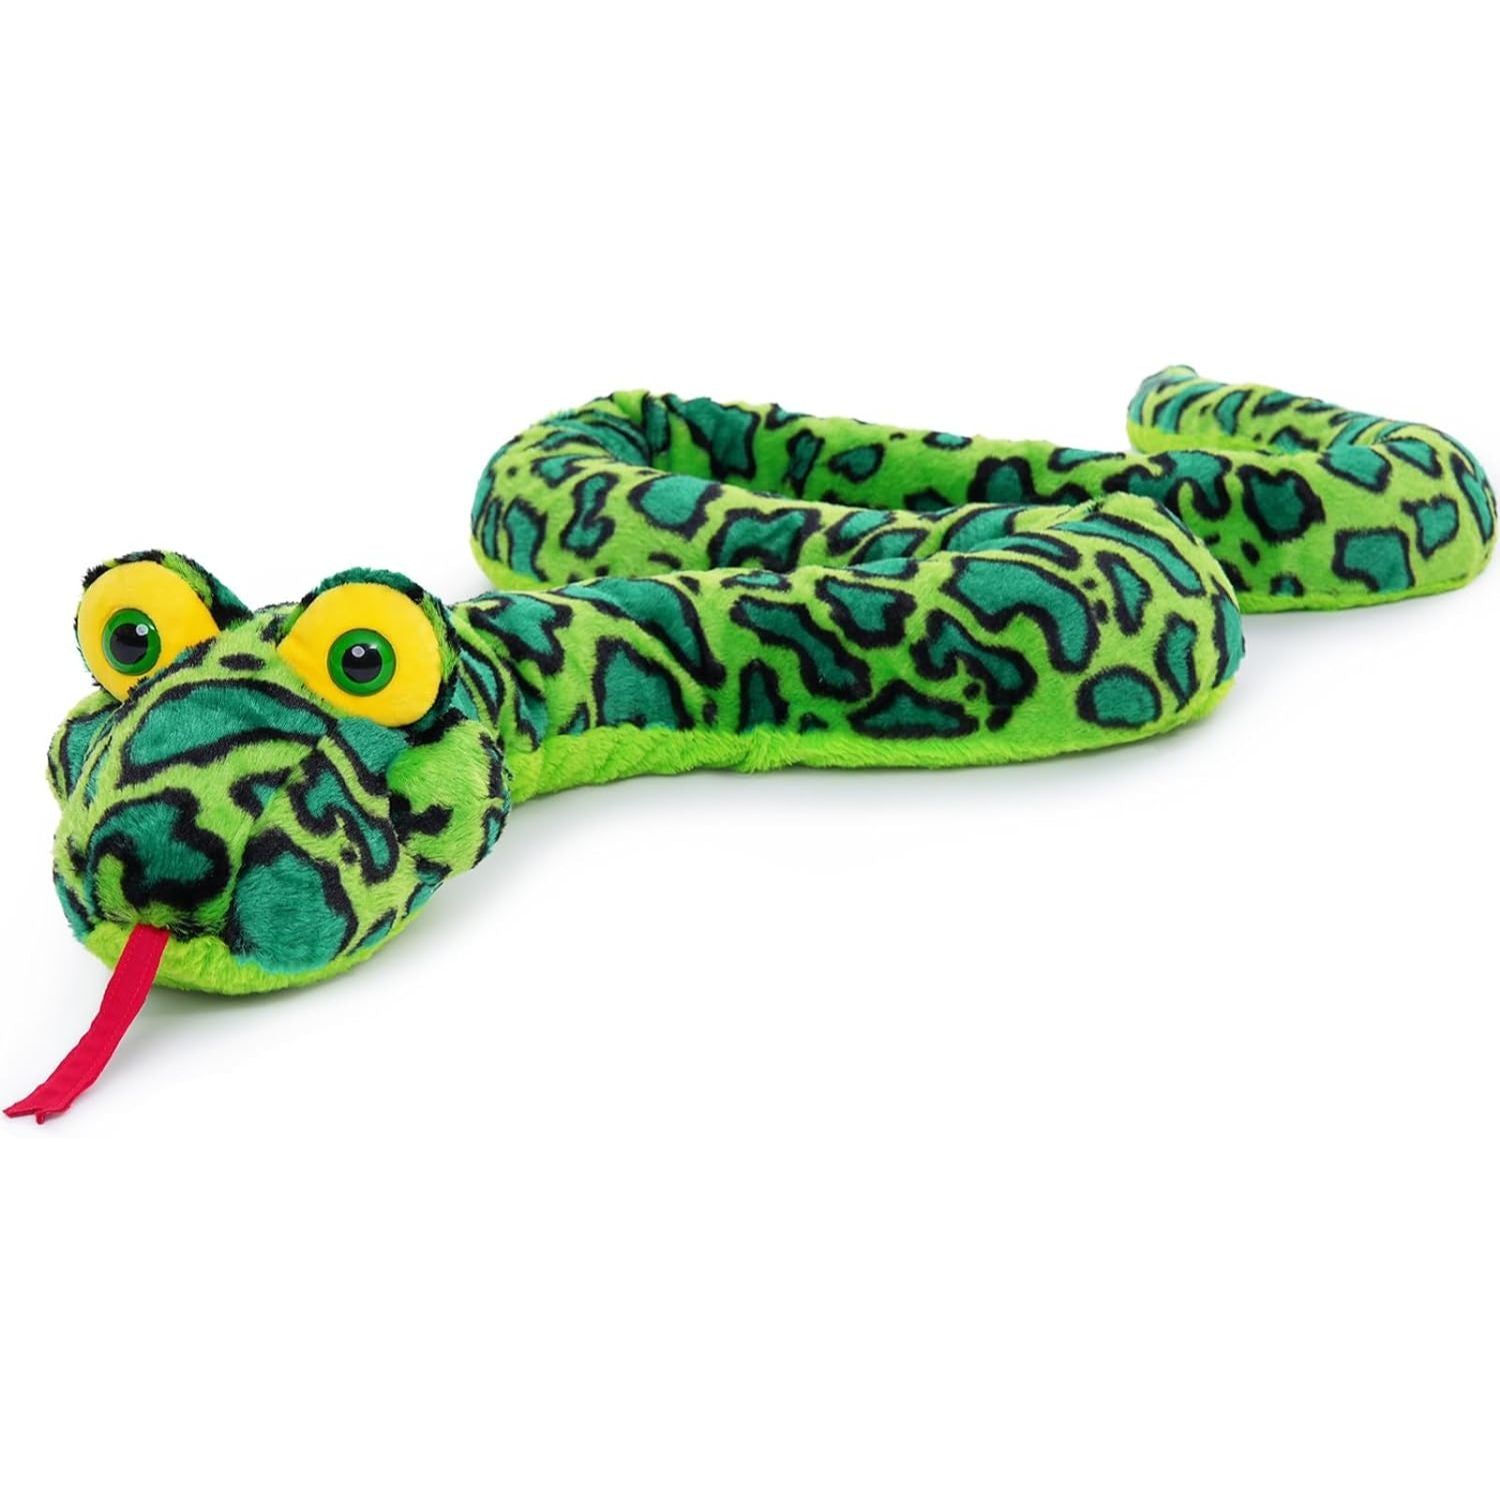 Giant Python Long Snake Plush Toy, Green, 98 Inches